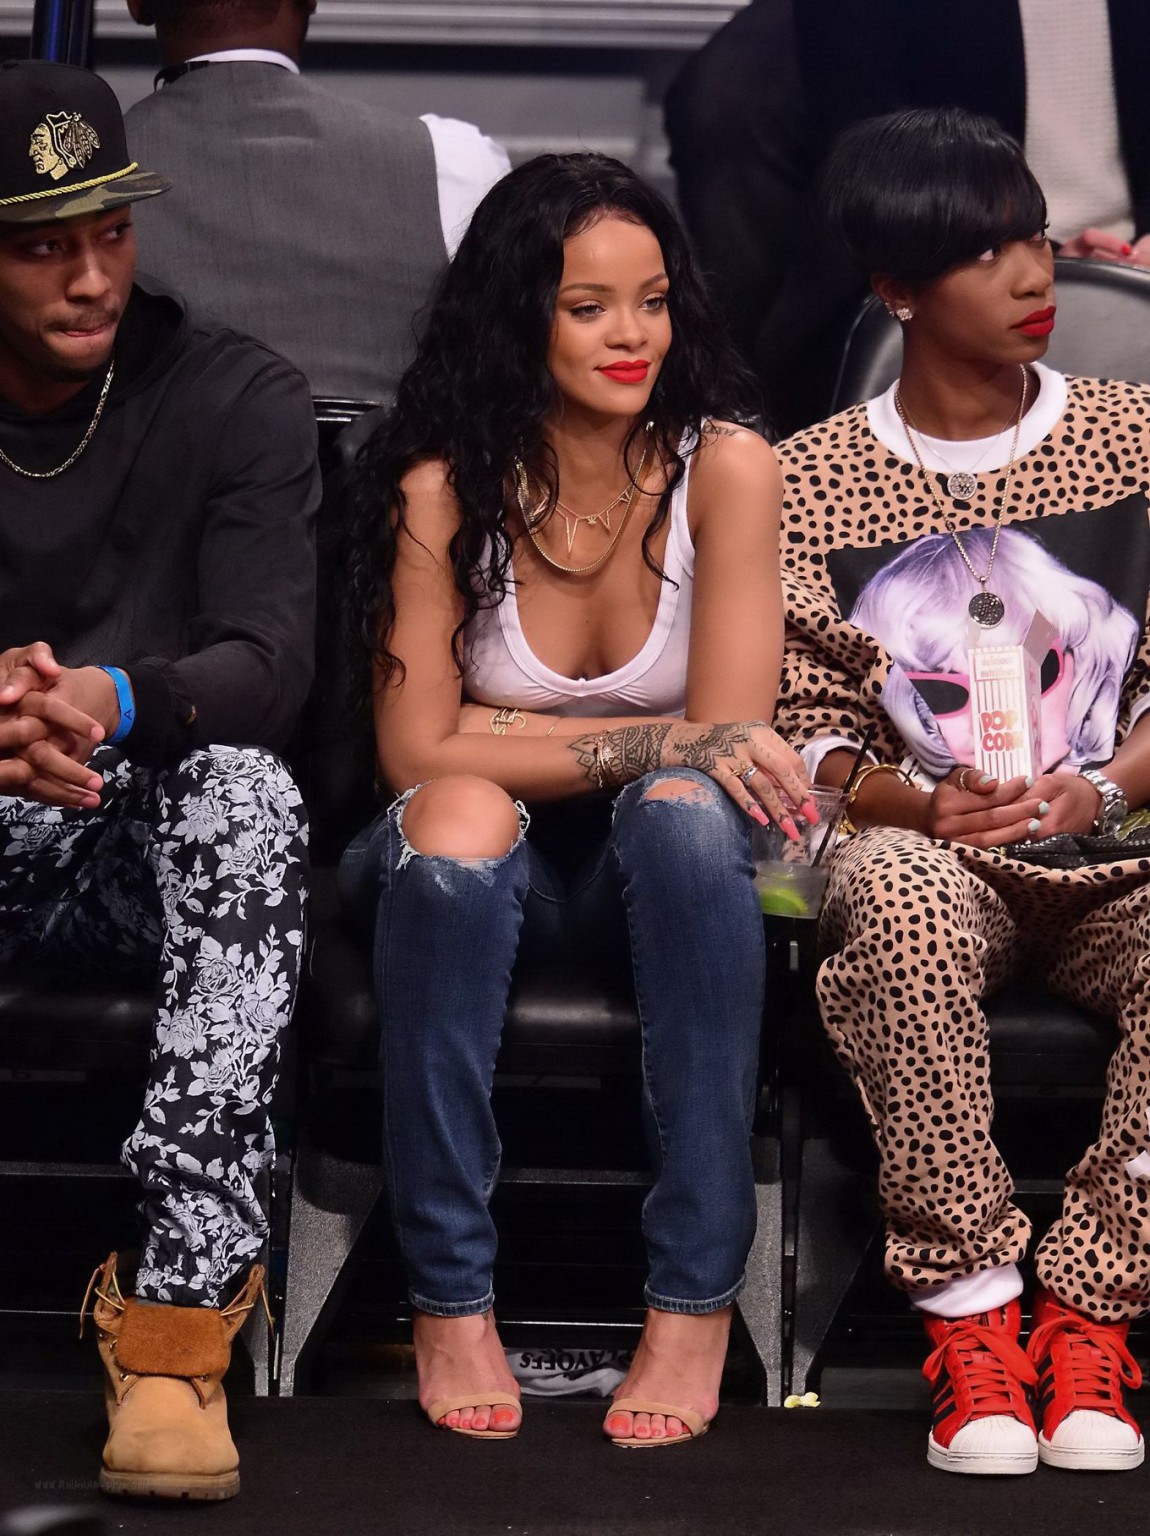 Rihanna shows off her boobs in seethru top at a basketball game in NYC #75198087